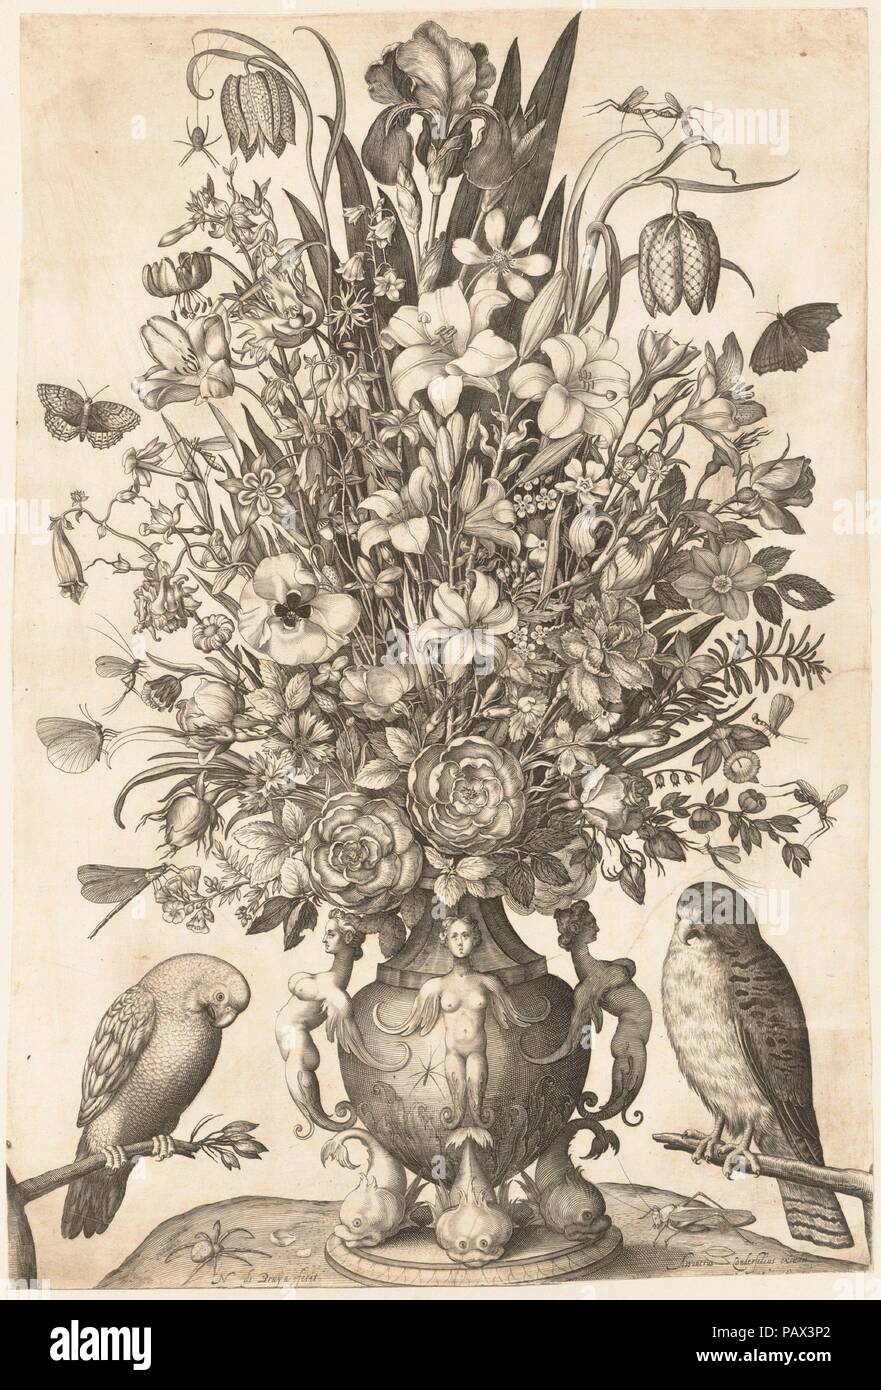 Vase of Flowers with Two Birds. Artist: Engraved by Nicolaes de Bruyn (Netherlandish,  Antwerp 1571-1656 Rotterdam); After ? Jacob Savery I (Netherlandish, ca. 1565-1603). Dimensions: sheet: 23 3/8 x 15 7/8 in. (59.4 x 40.3 cm). Date: 1590-1656. Museum: Metropolitan Museum of Art, New York, USA. Stock Photo